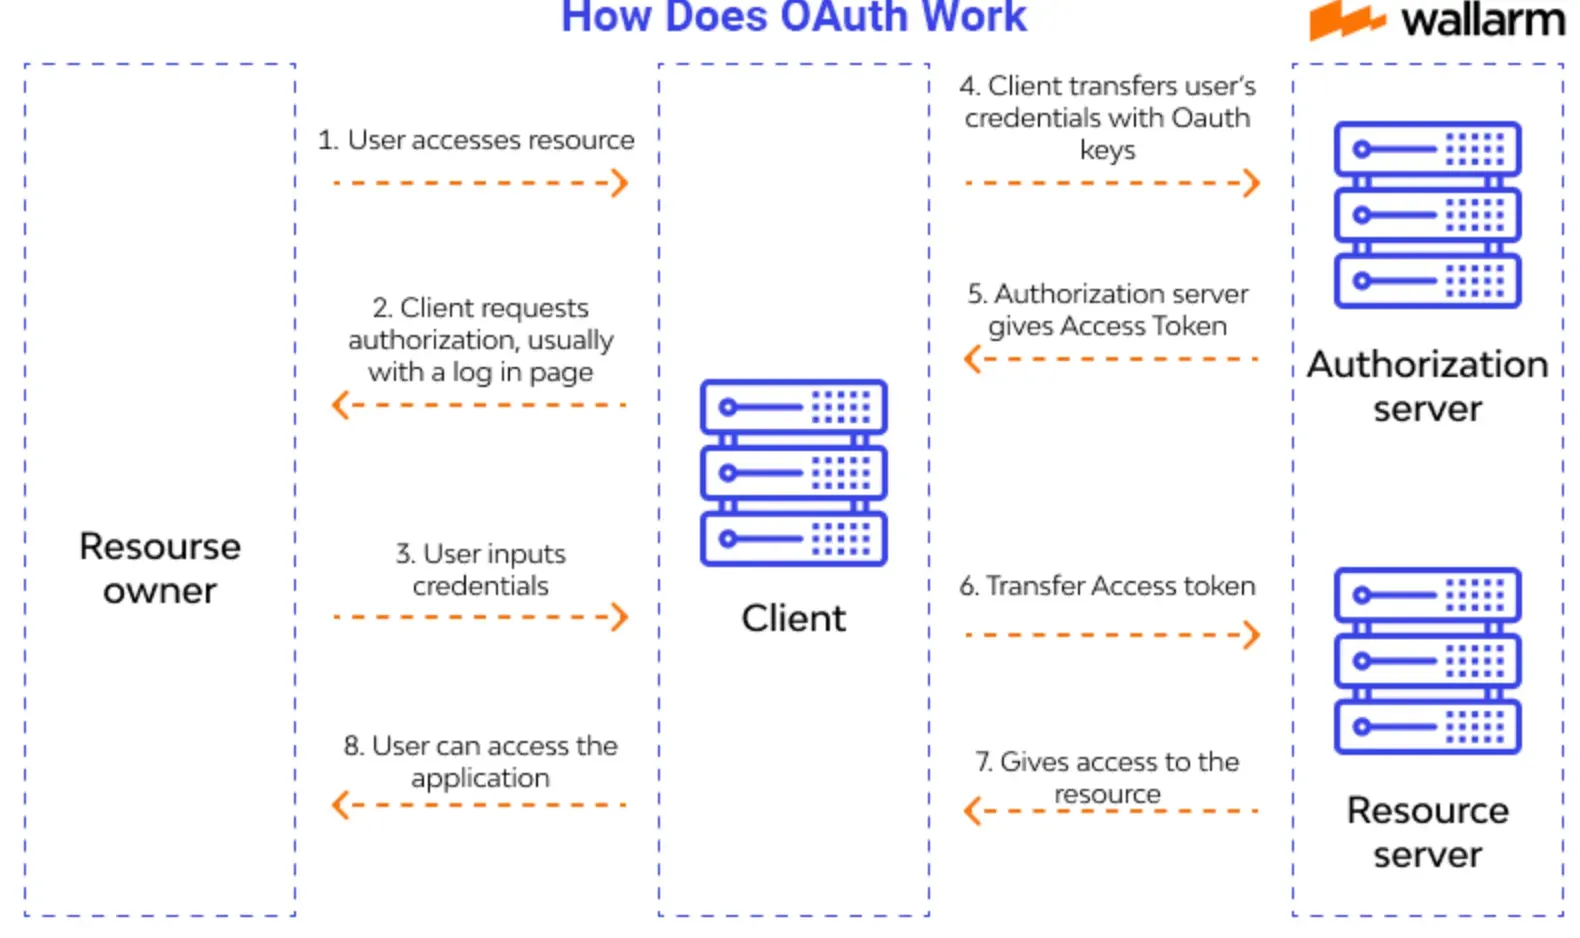 How does Oauth Work?